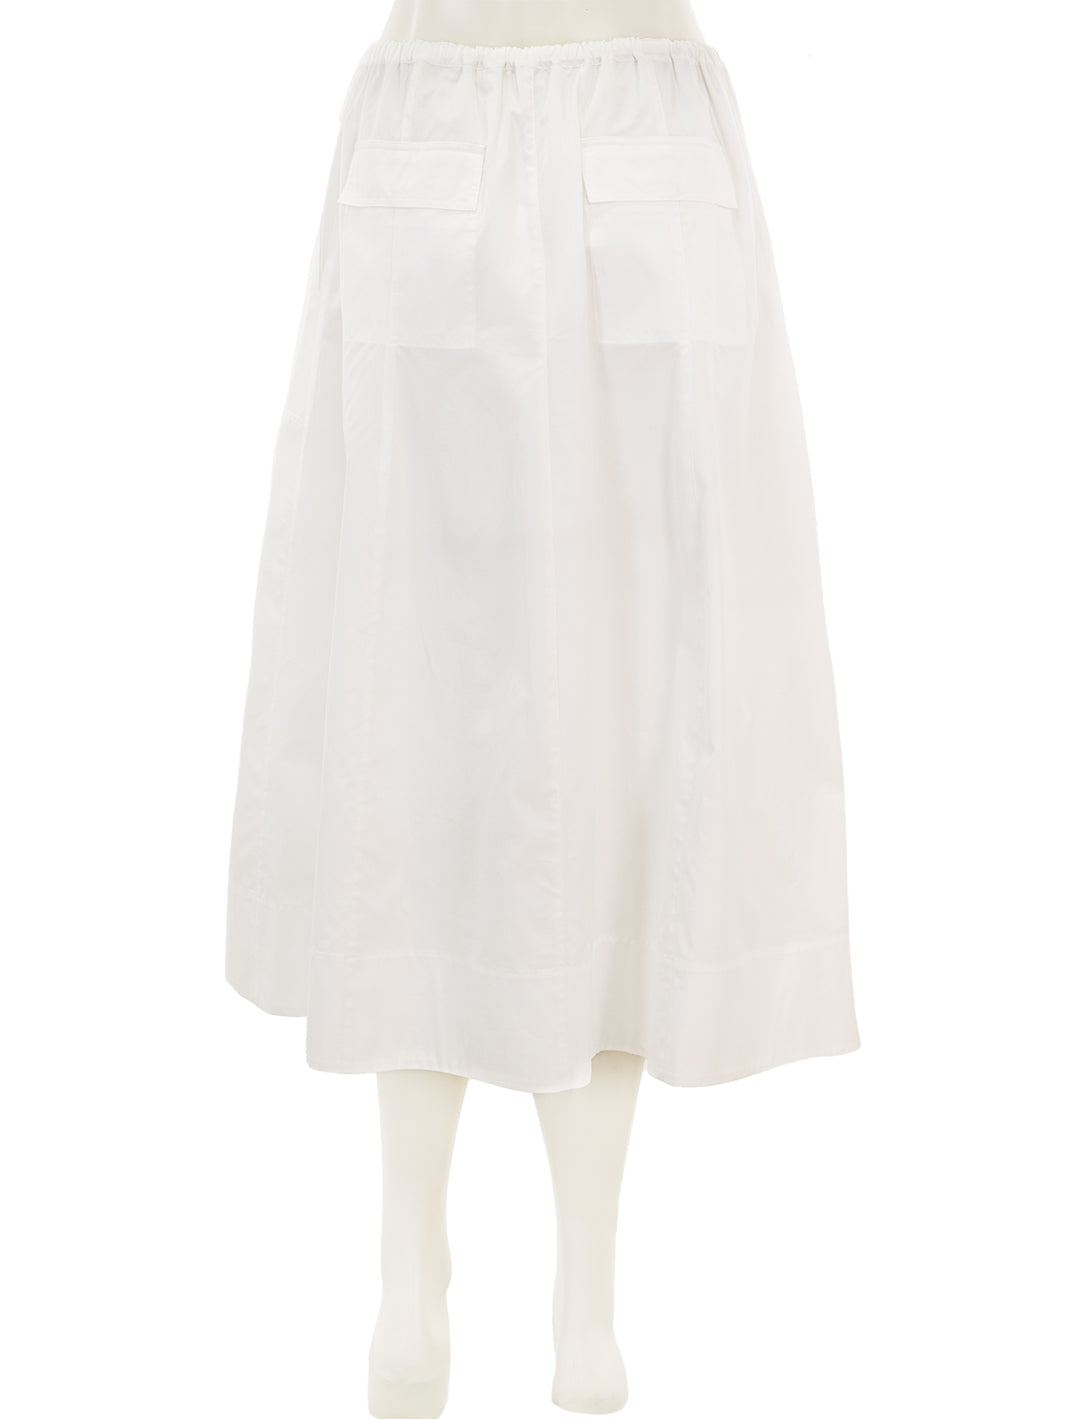 Back view of Vince's gathered utility zipper pocket skirt in optic white.